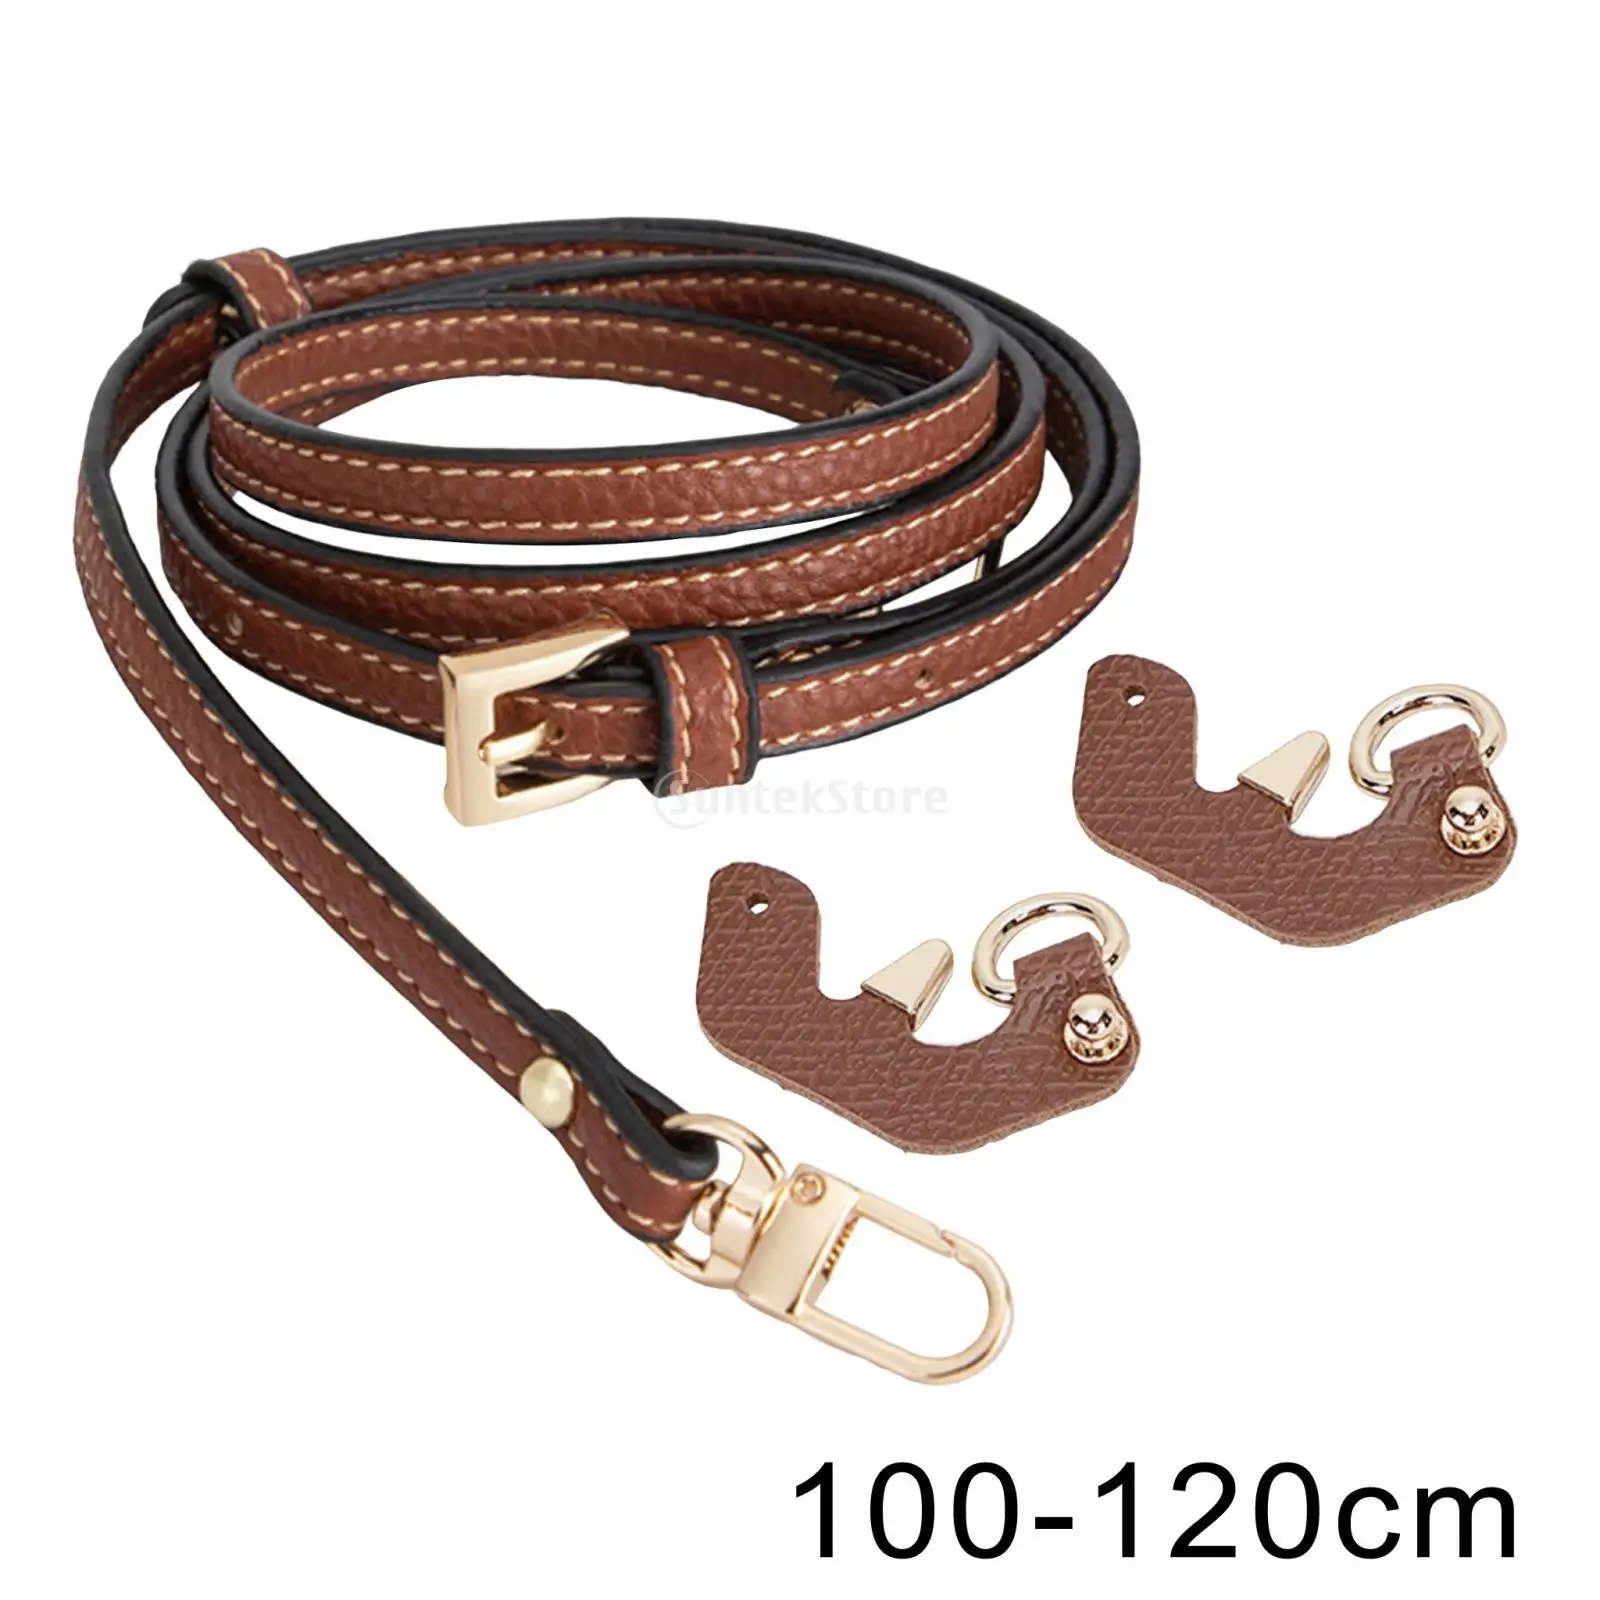 Purse Strap PU Leather Universal Versatile Simple Fashion Cross Body Strap for Purse Clutches Shoulder Bag Small Bags Briefcase